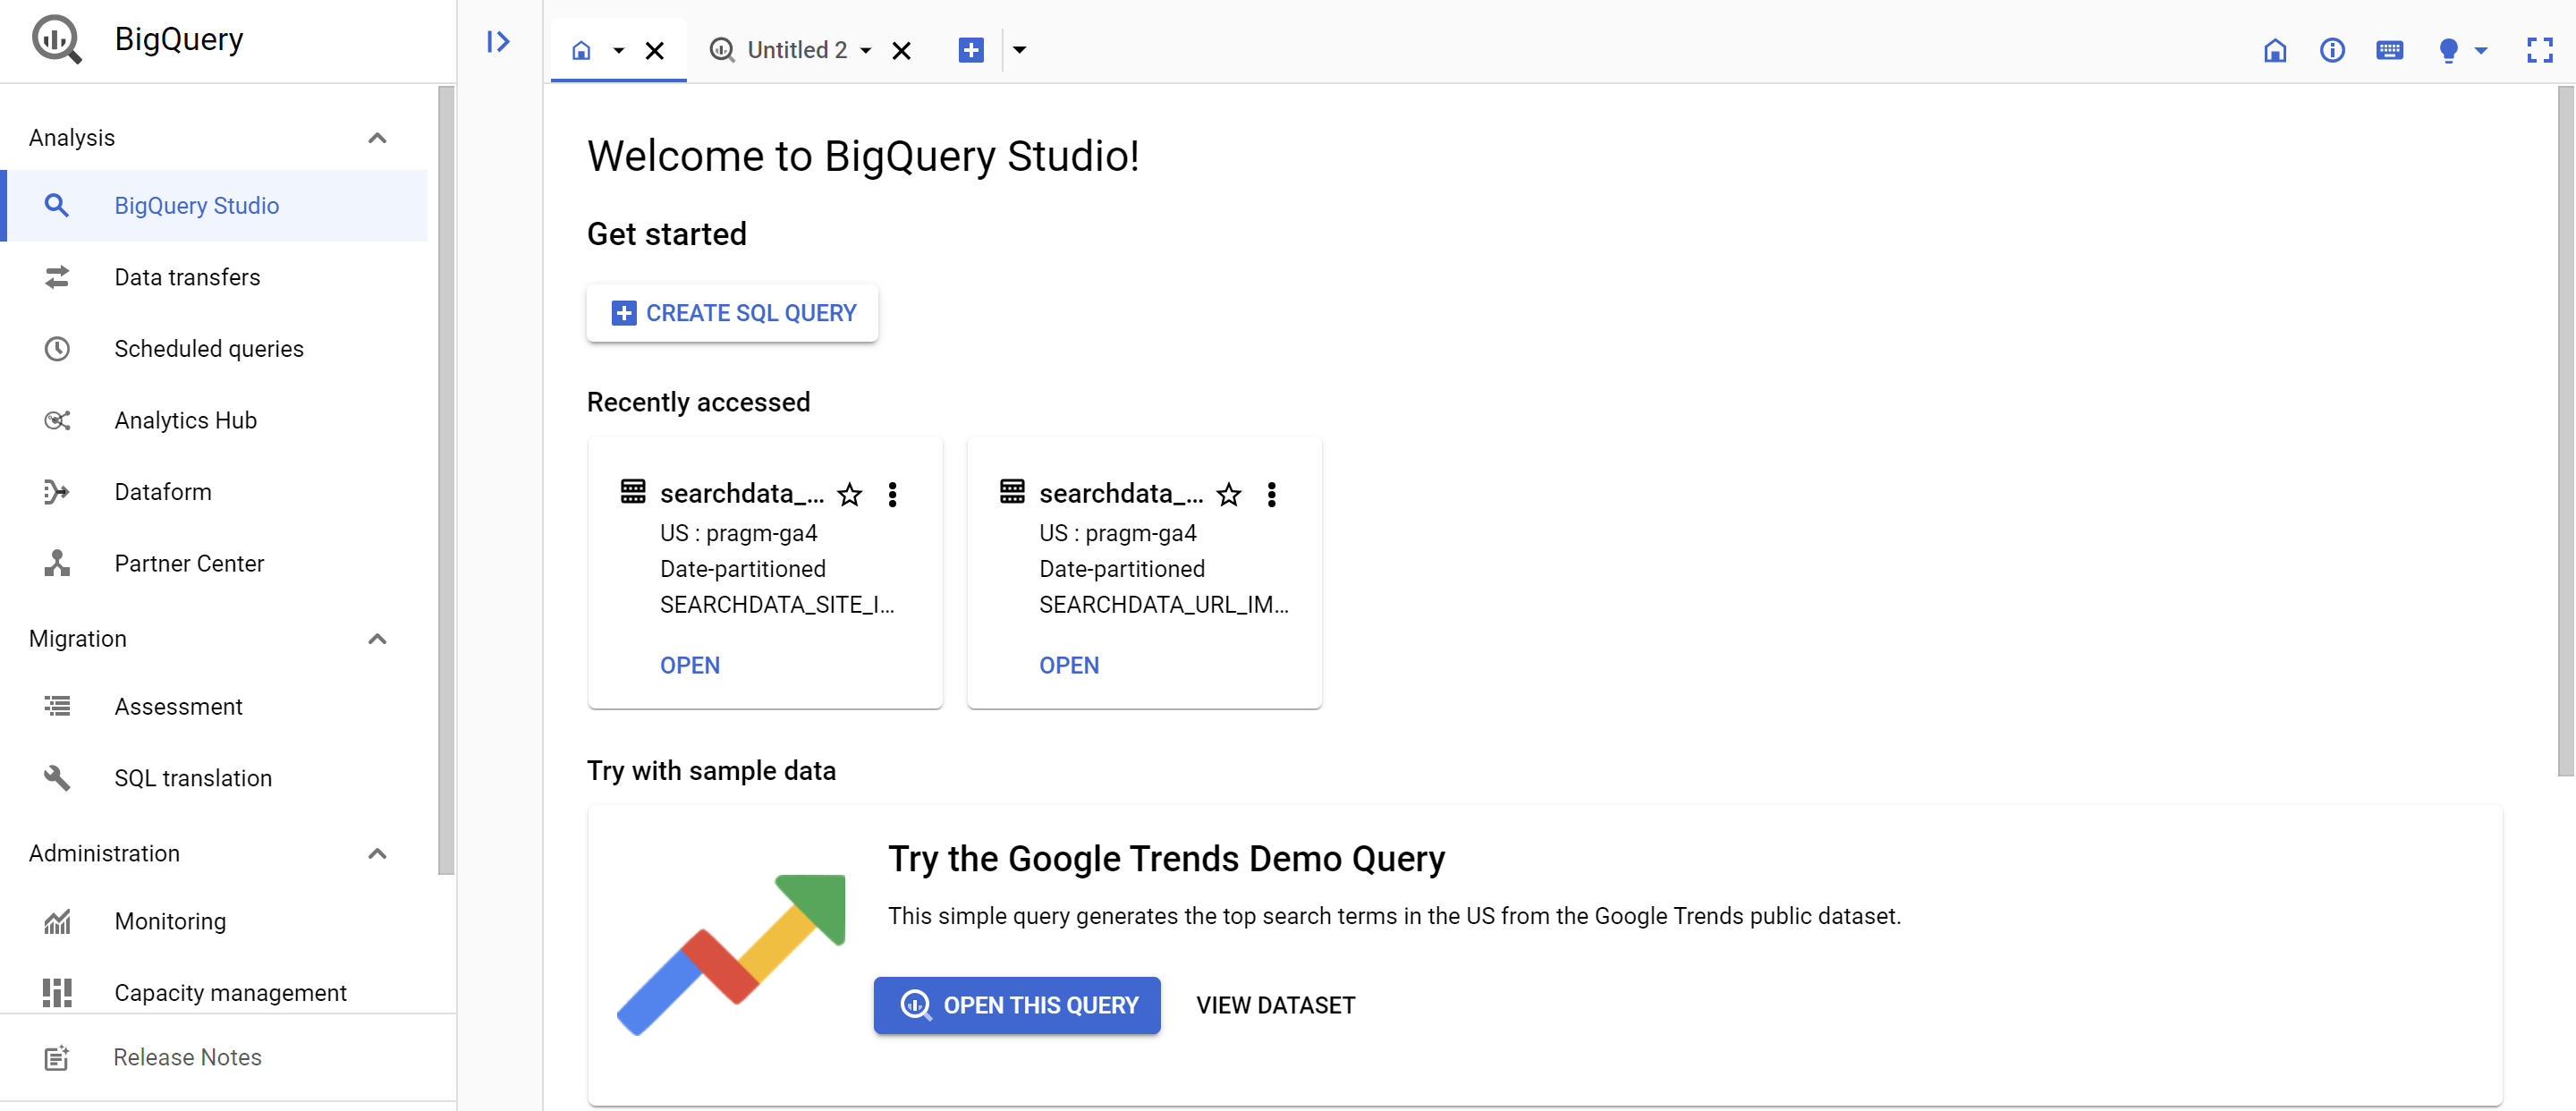 access screen to the BigQuery Studio where you will be creating your first SQL query. 